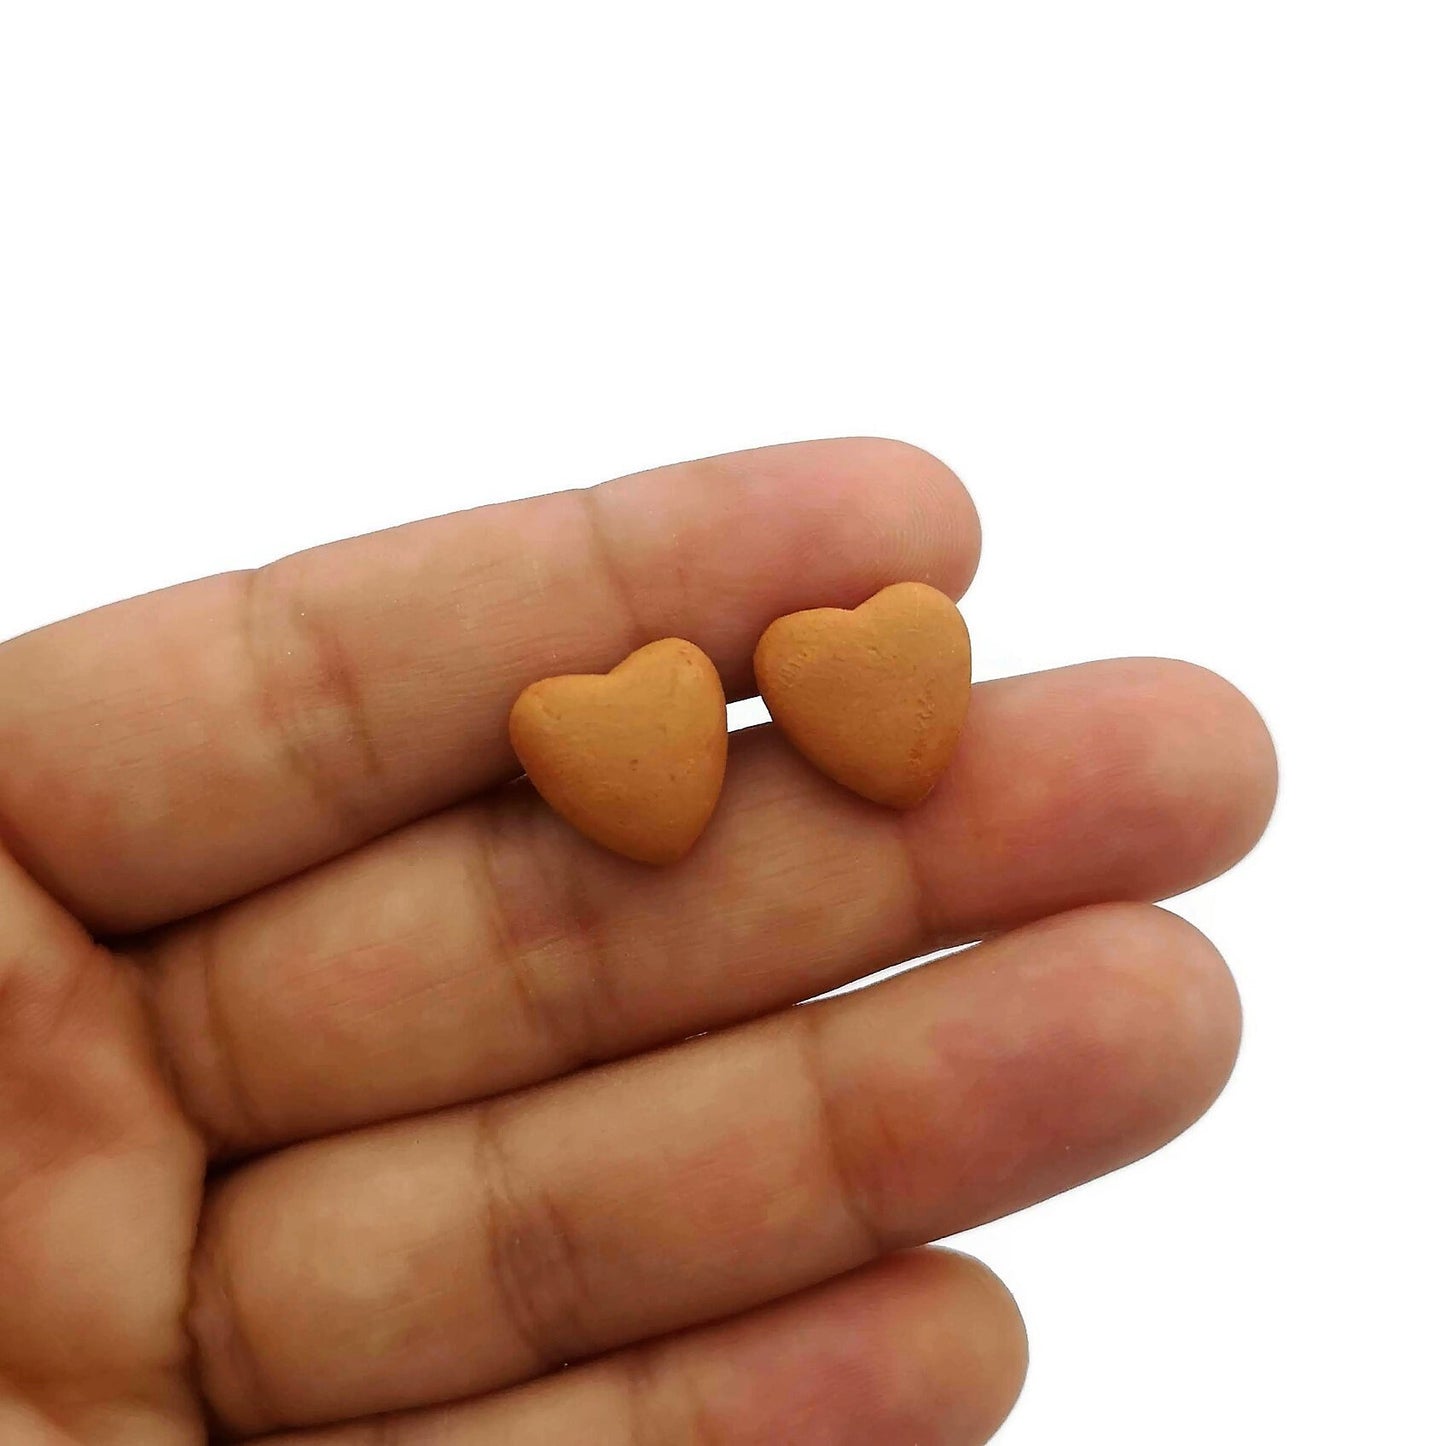 Heart Stud Earrings For Women, Minimalist Novelty Cute Stud Earrings Dainty, Best Gifts For Her, Unique Valentines Day Gift For Girlfriend - Ceramica Ana Rafael